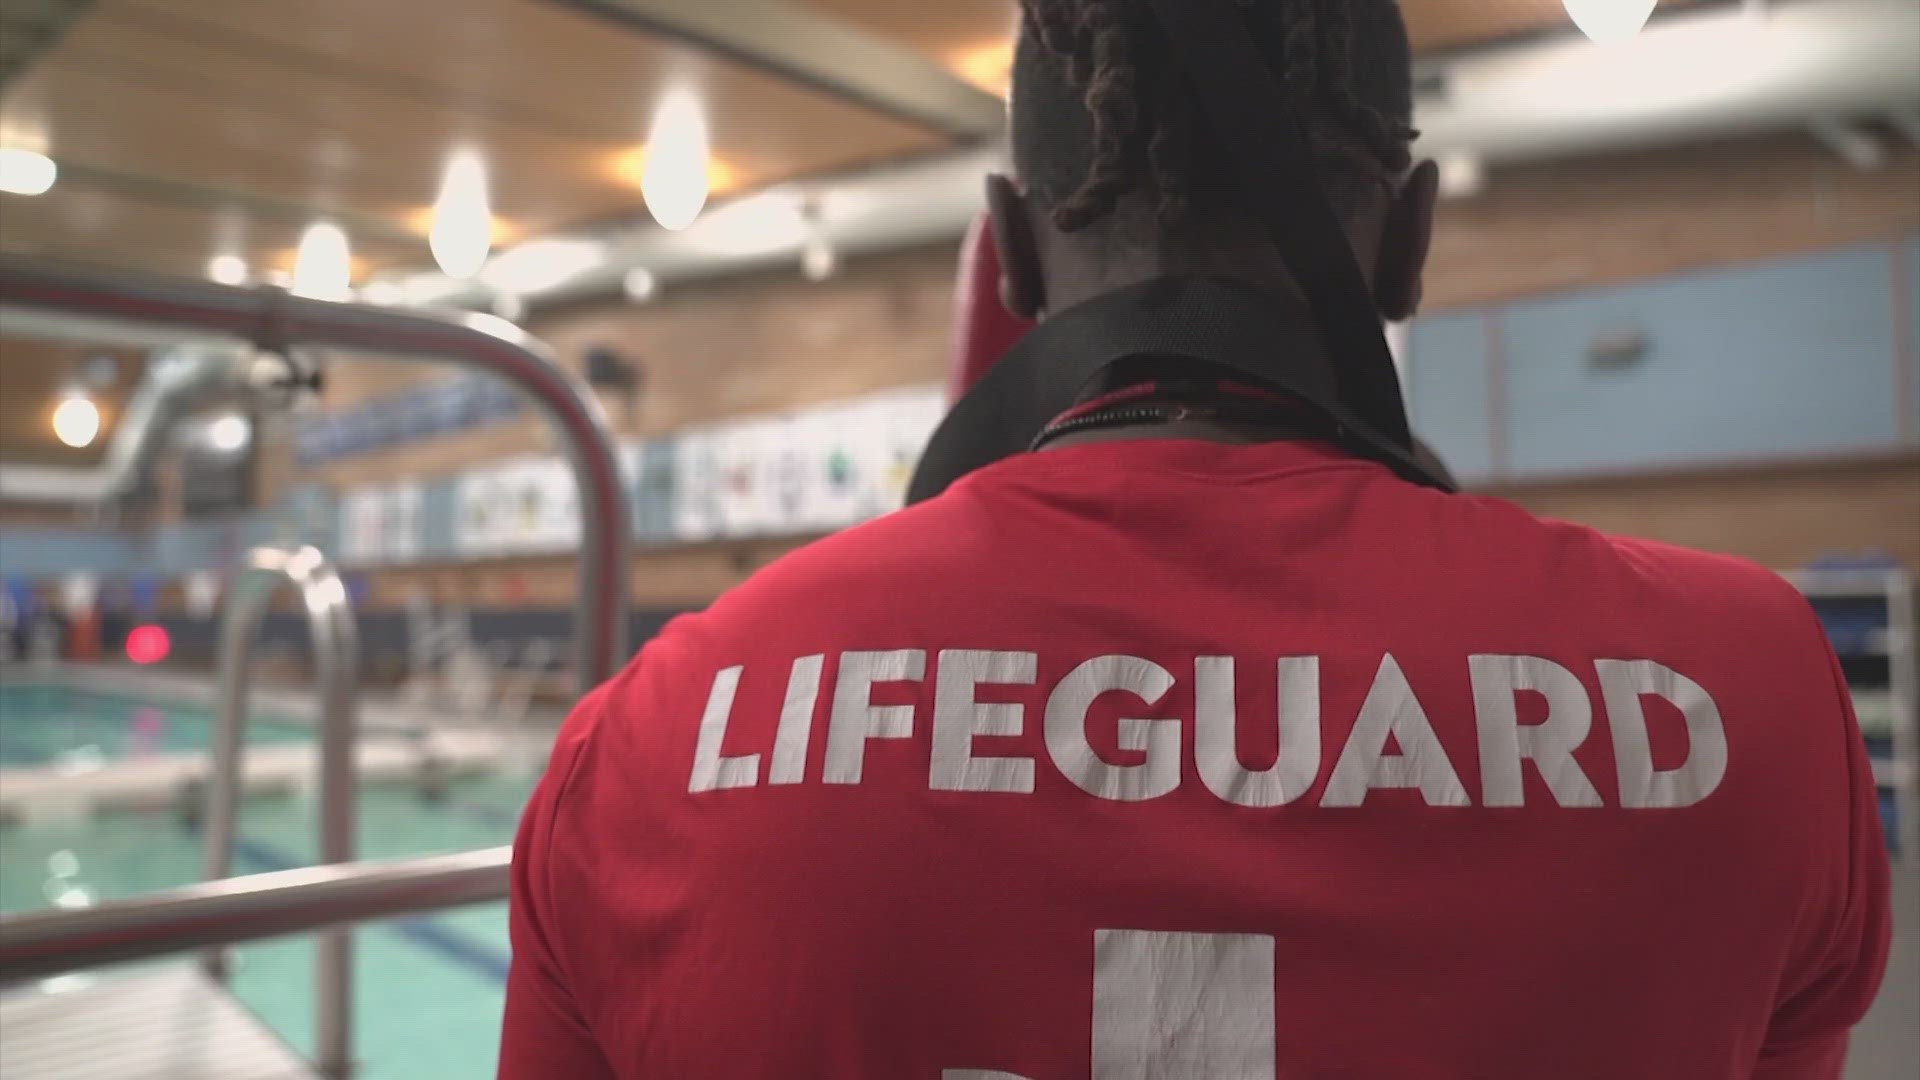 Mount Rainier Pool in Des Moines reports about 70% of lifeguard staffing is filled going into the summer season. Some swimming hot spots in Seattle remain closed.